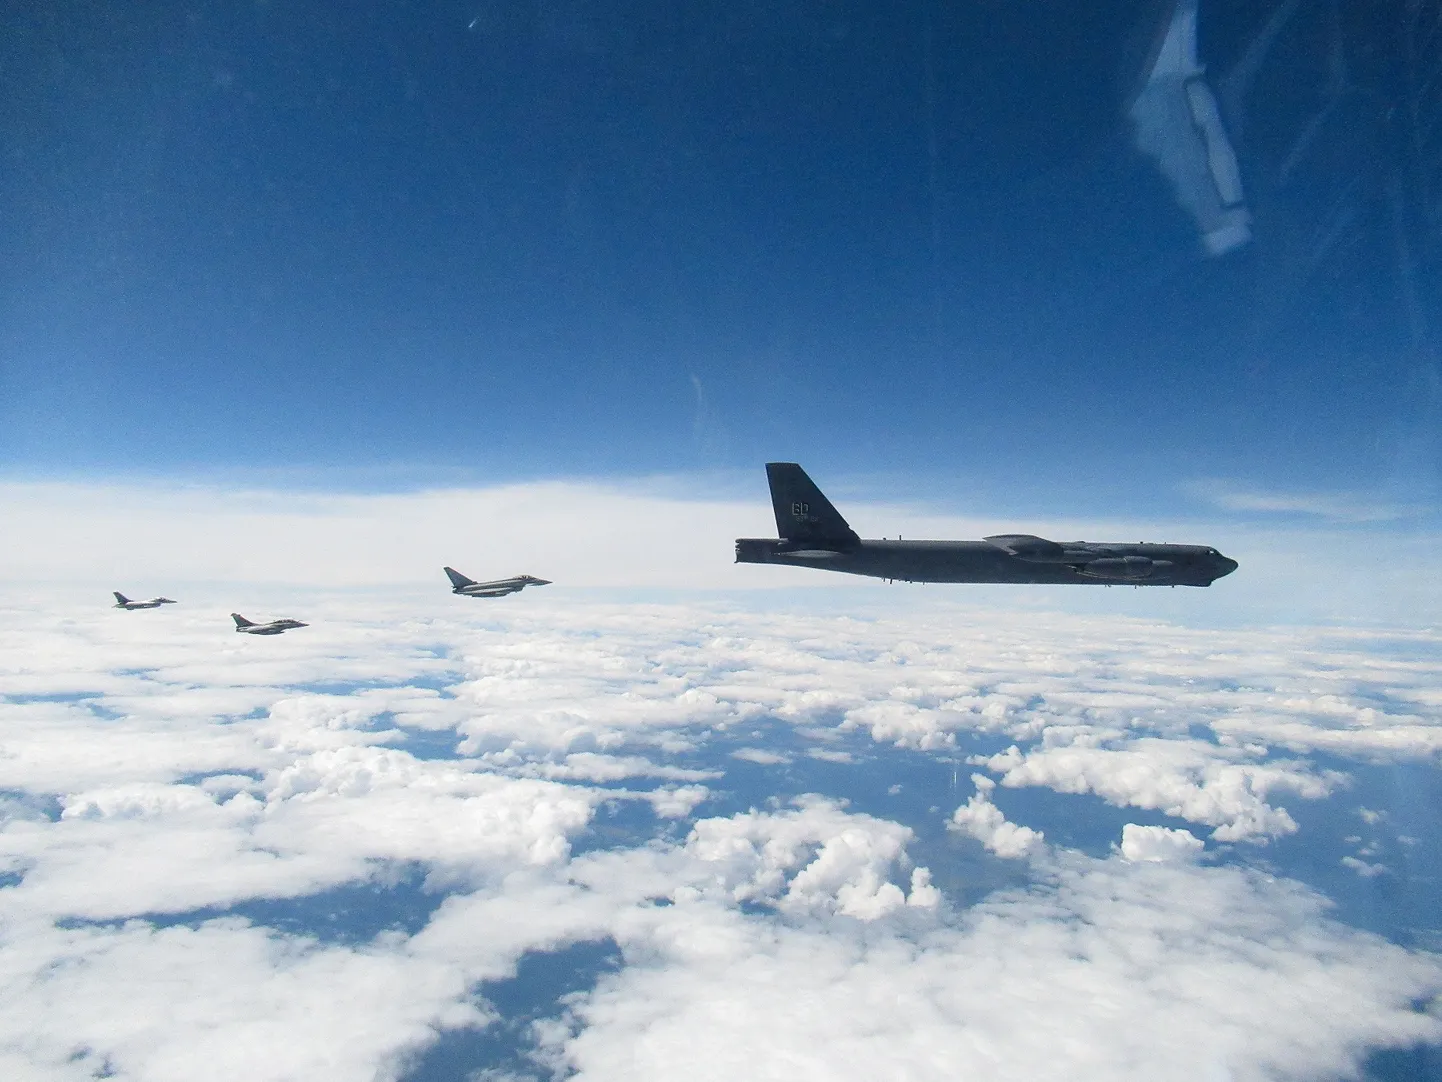 United States Air Force B-52H Stratofortress strategic bombers made an overflight of Estonia as a part of an exercise.